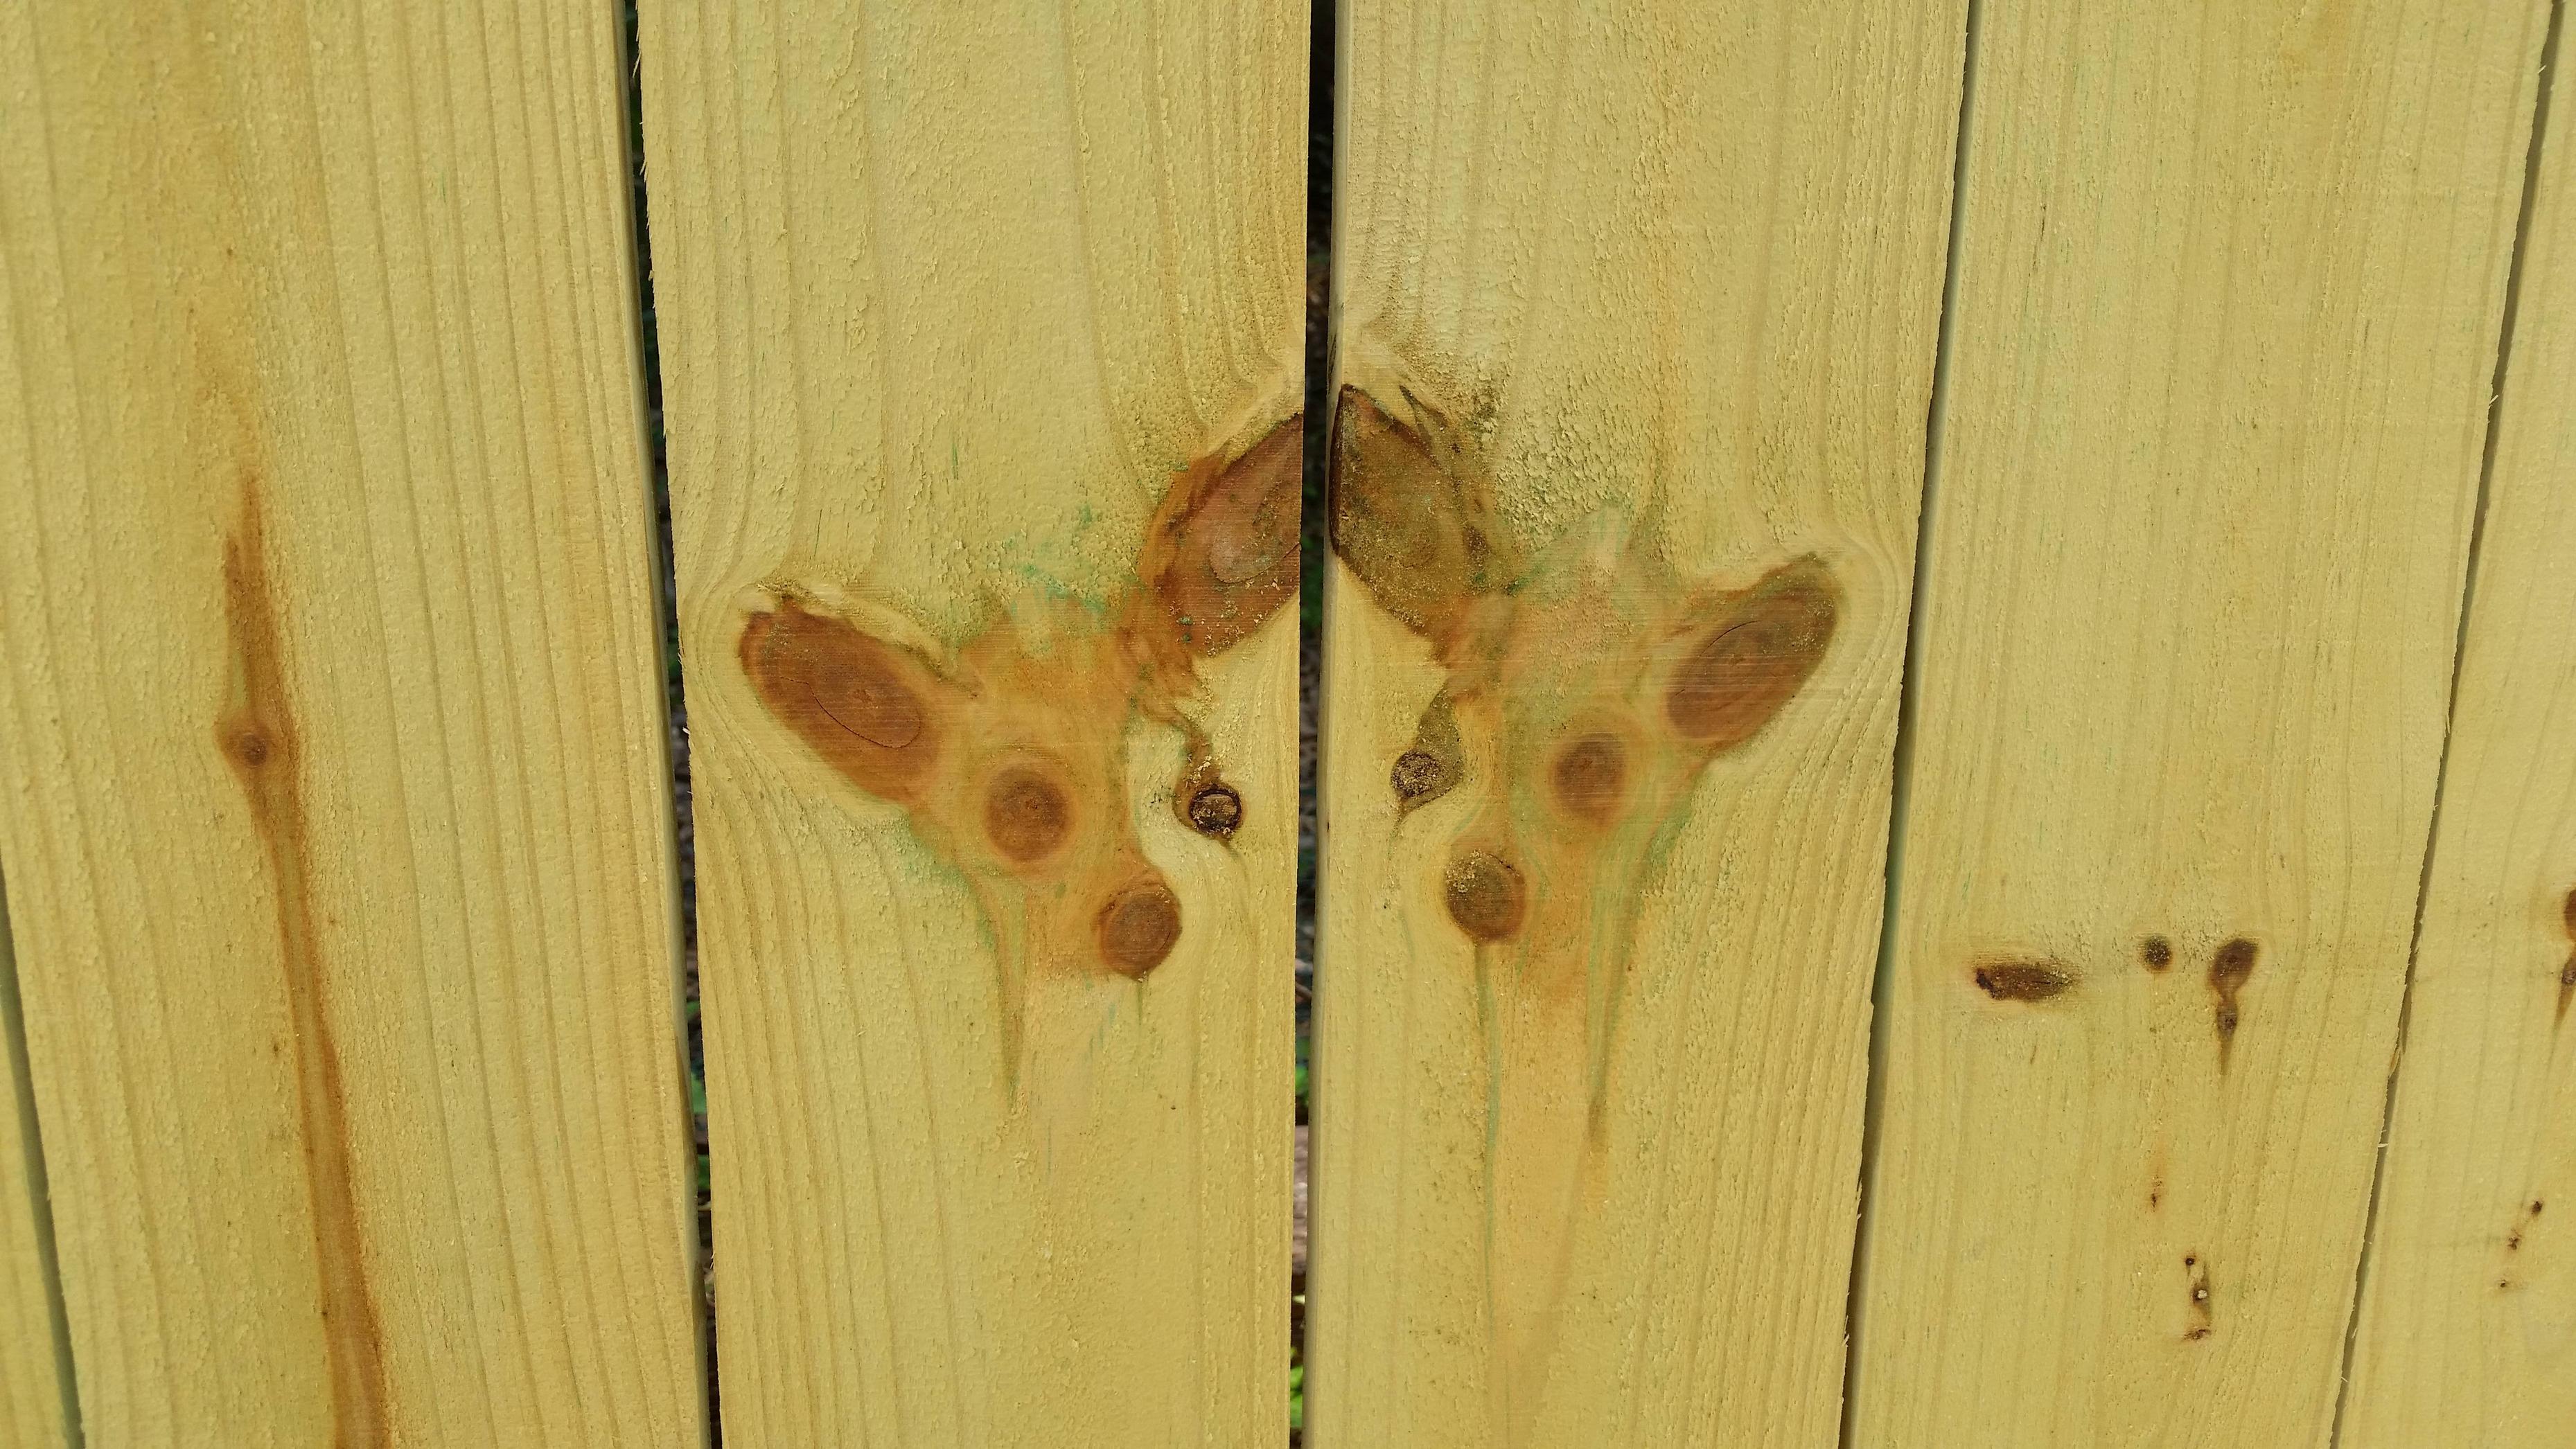 Fence planks that look like two chihuahuas